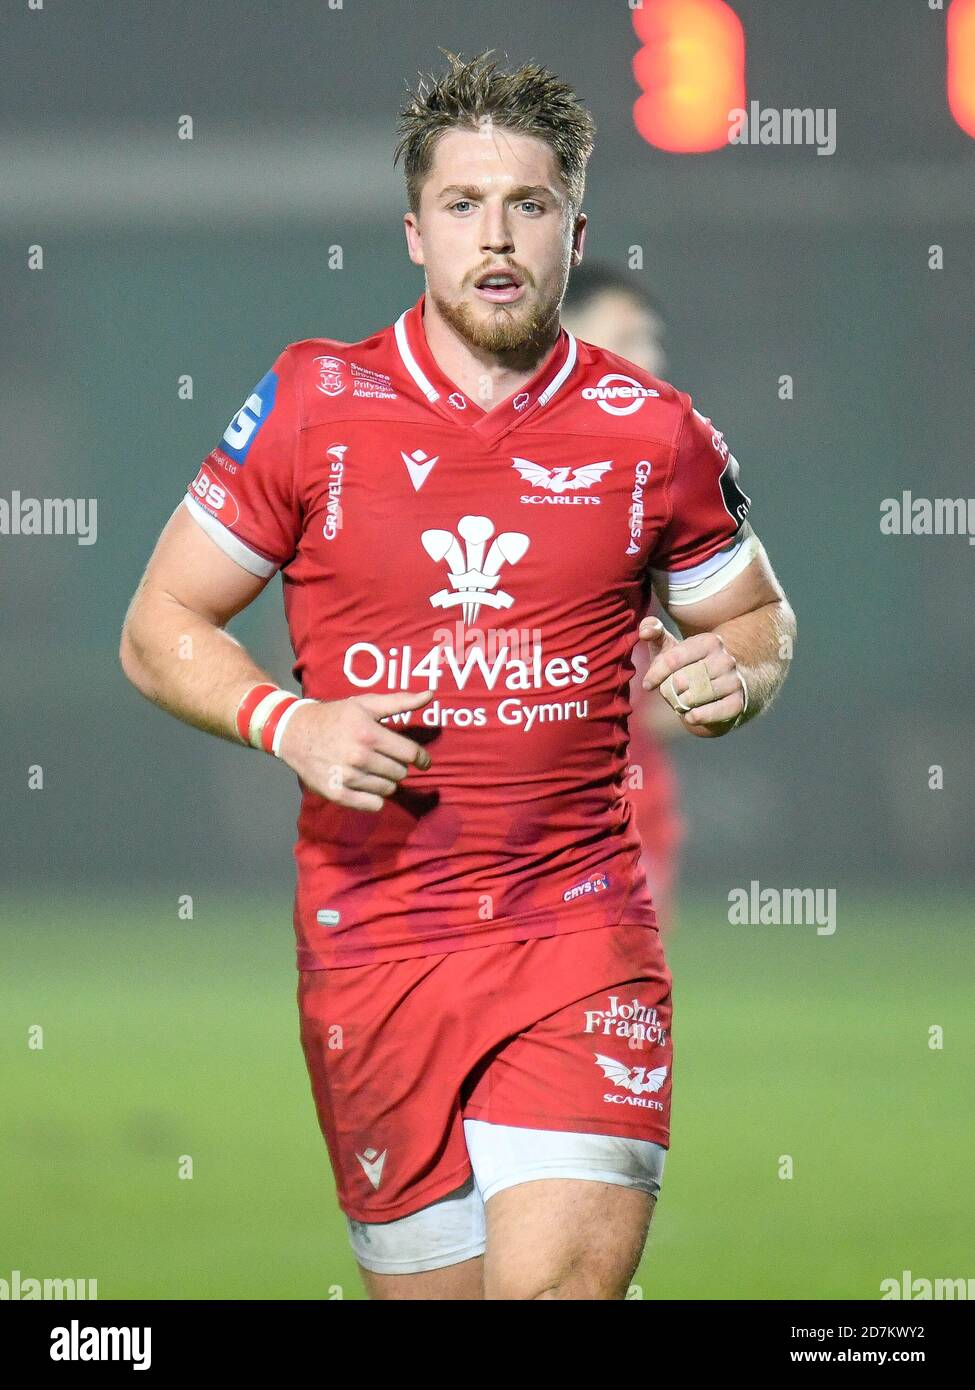 Stadio Comunale di Monigo, Treviso, Italy, 23 Oct 2020, Tyler Morgan (Scarlets) during Benetton Treviso vs Scarlets Rugby, Rugby Guinness Pro 14 match - Credit: LM/Ettore Griffoni/Alamy Live News Stock Photo